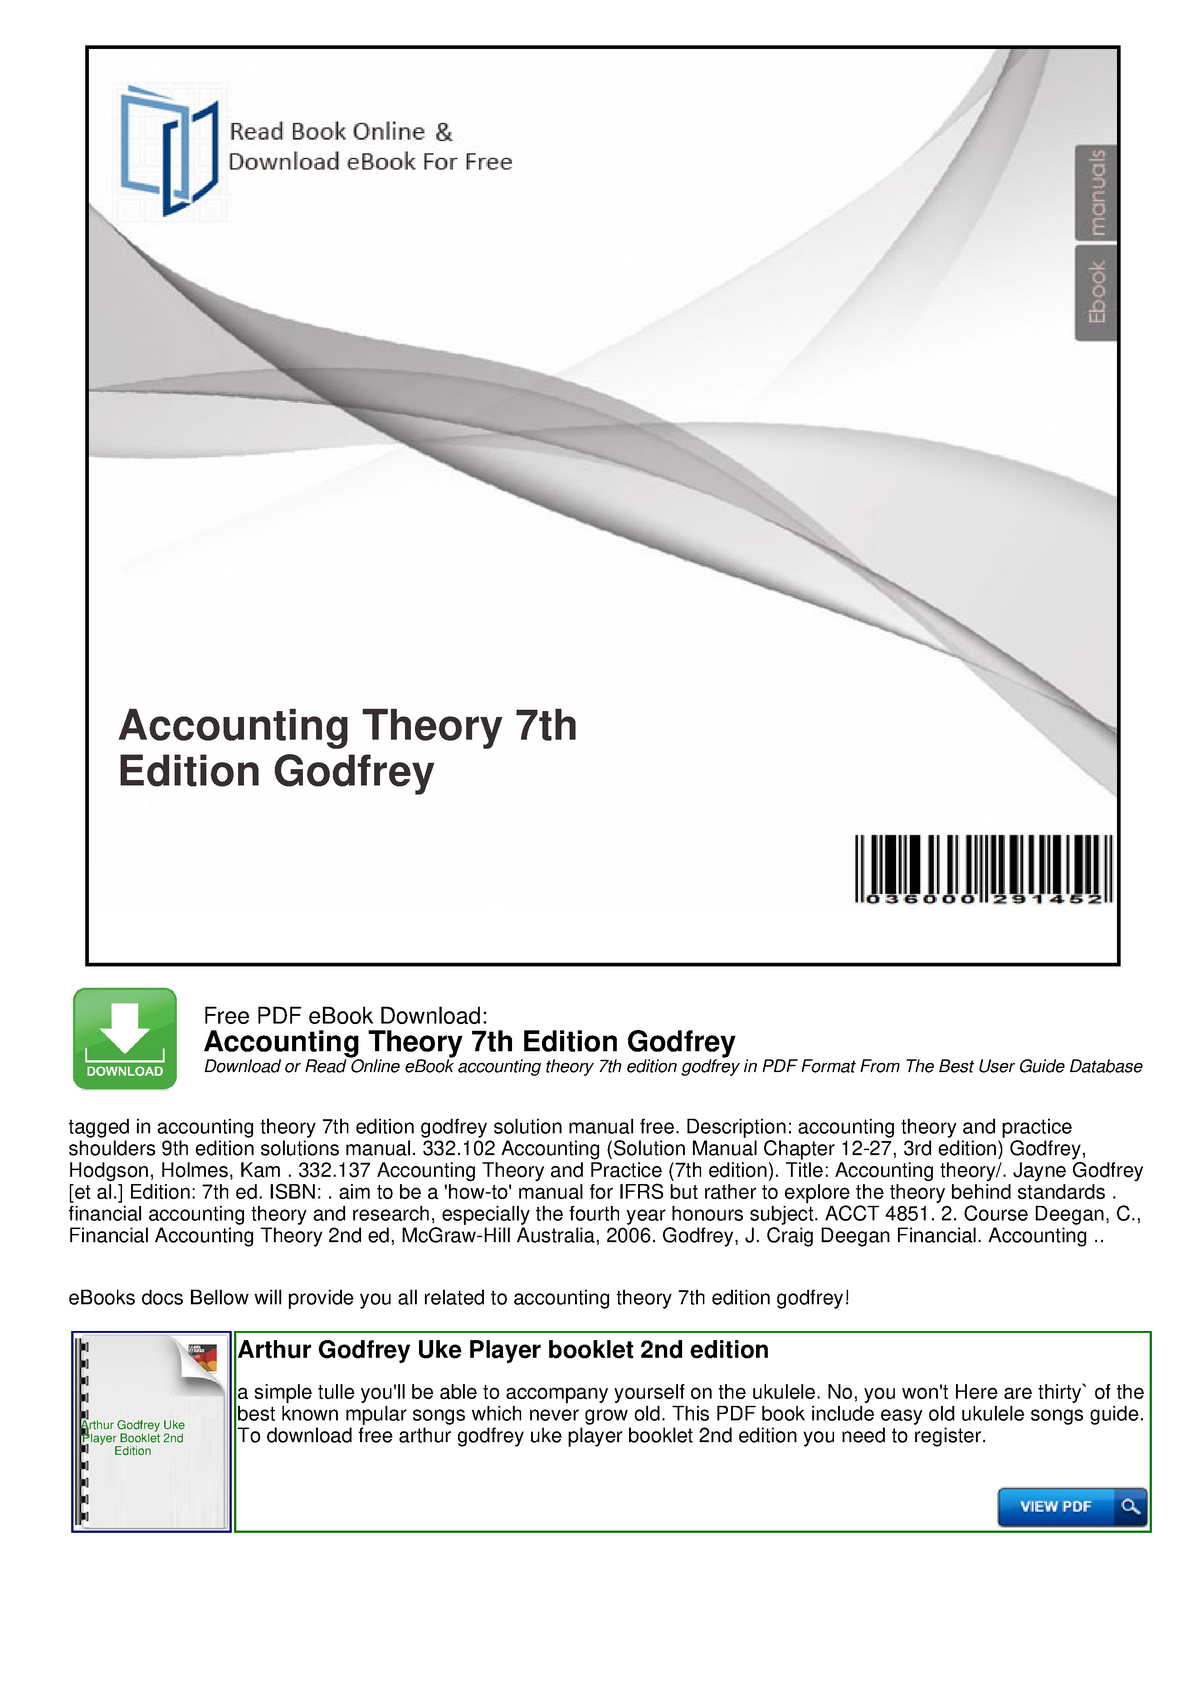 Accounting theory pdf ebook download my dell application download